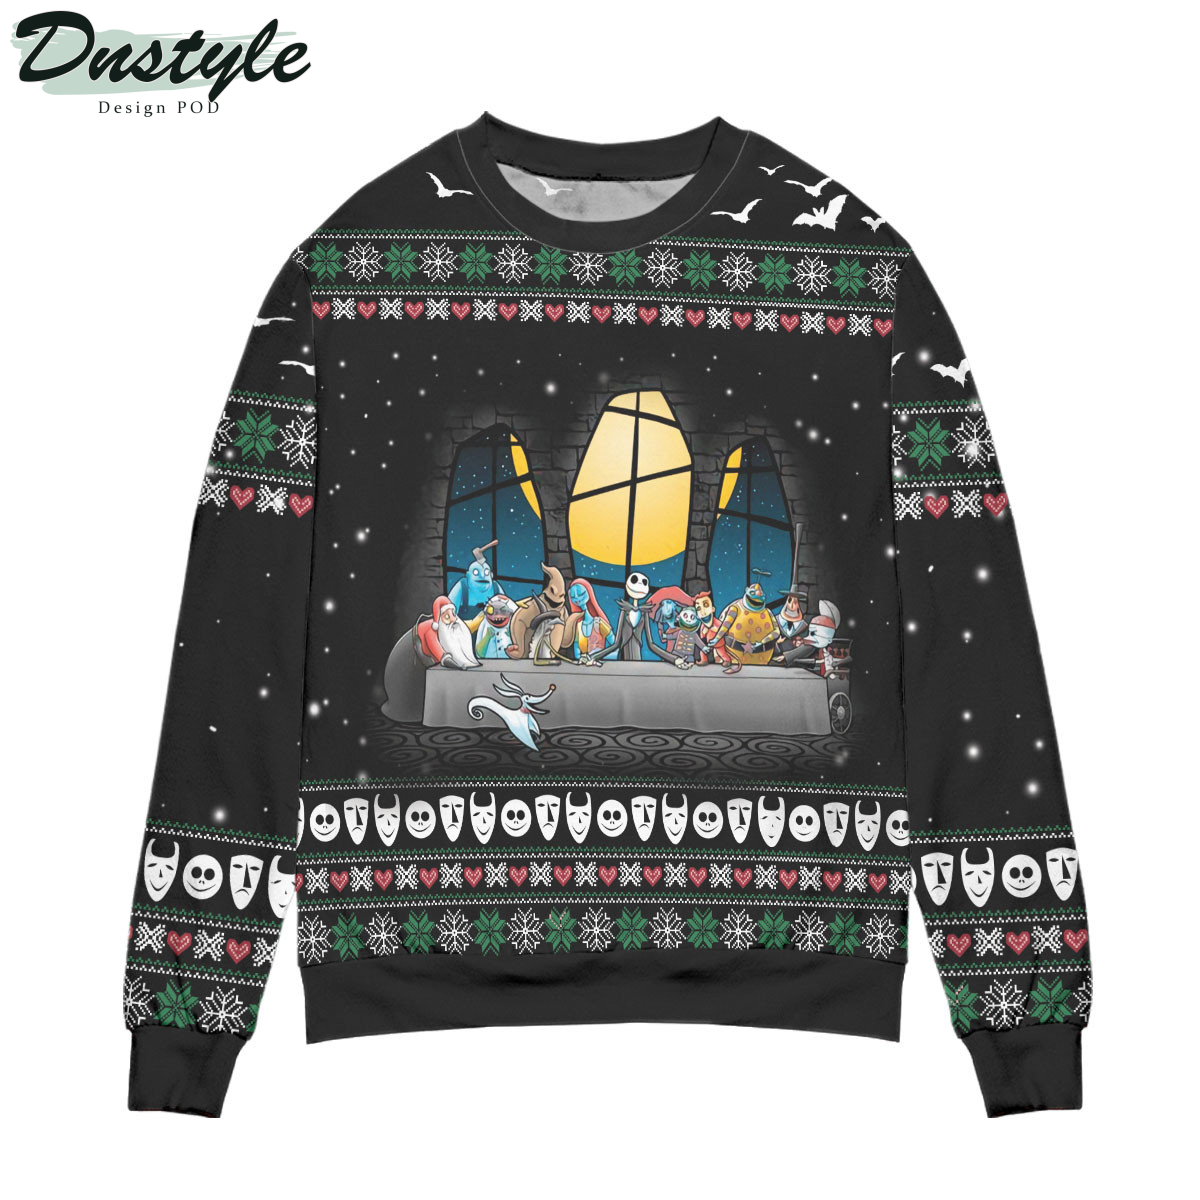 The Last Supper Windshield Sun Shade Ugly Christmas Sweater